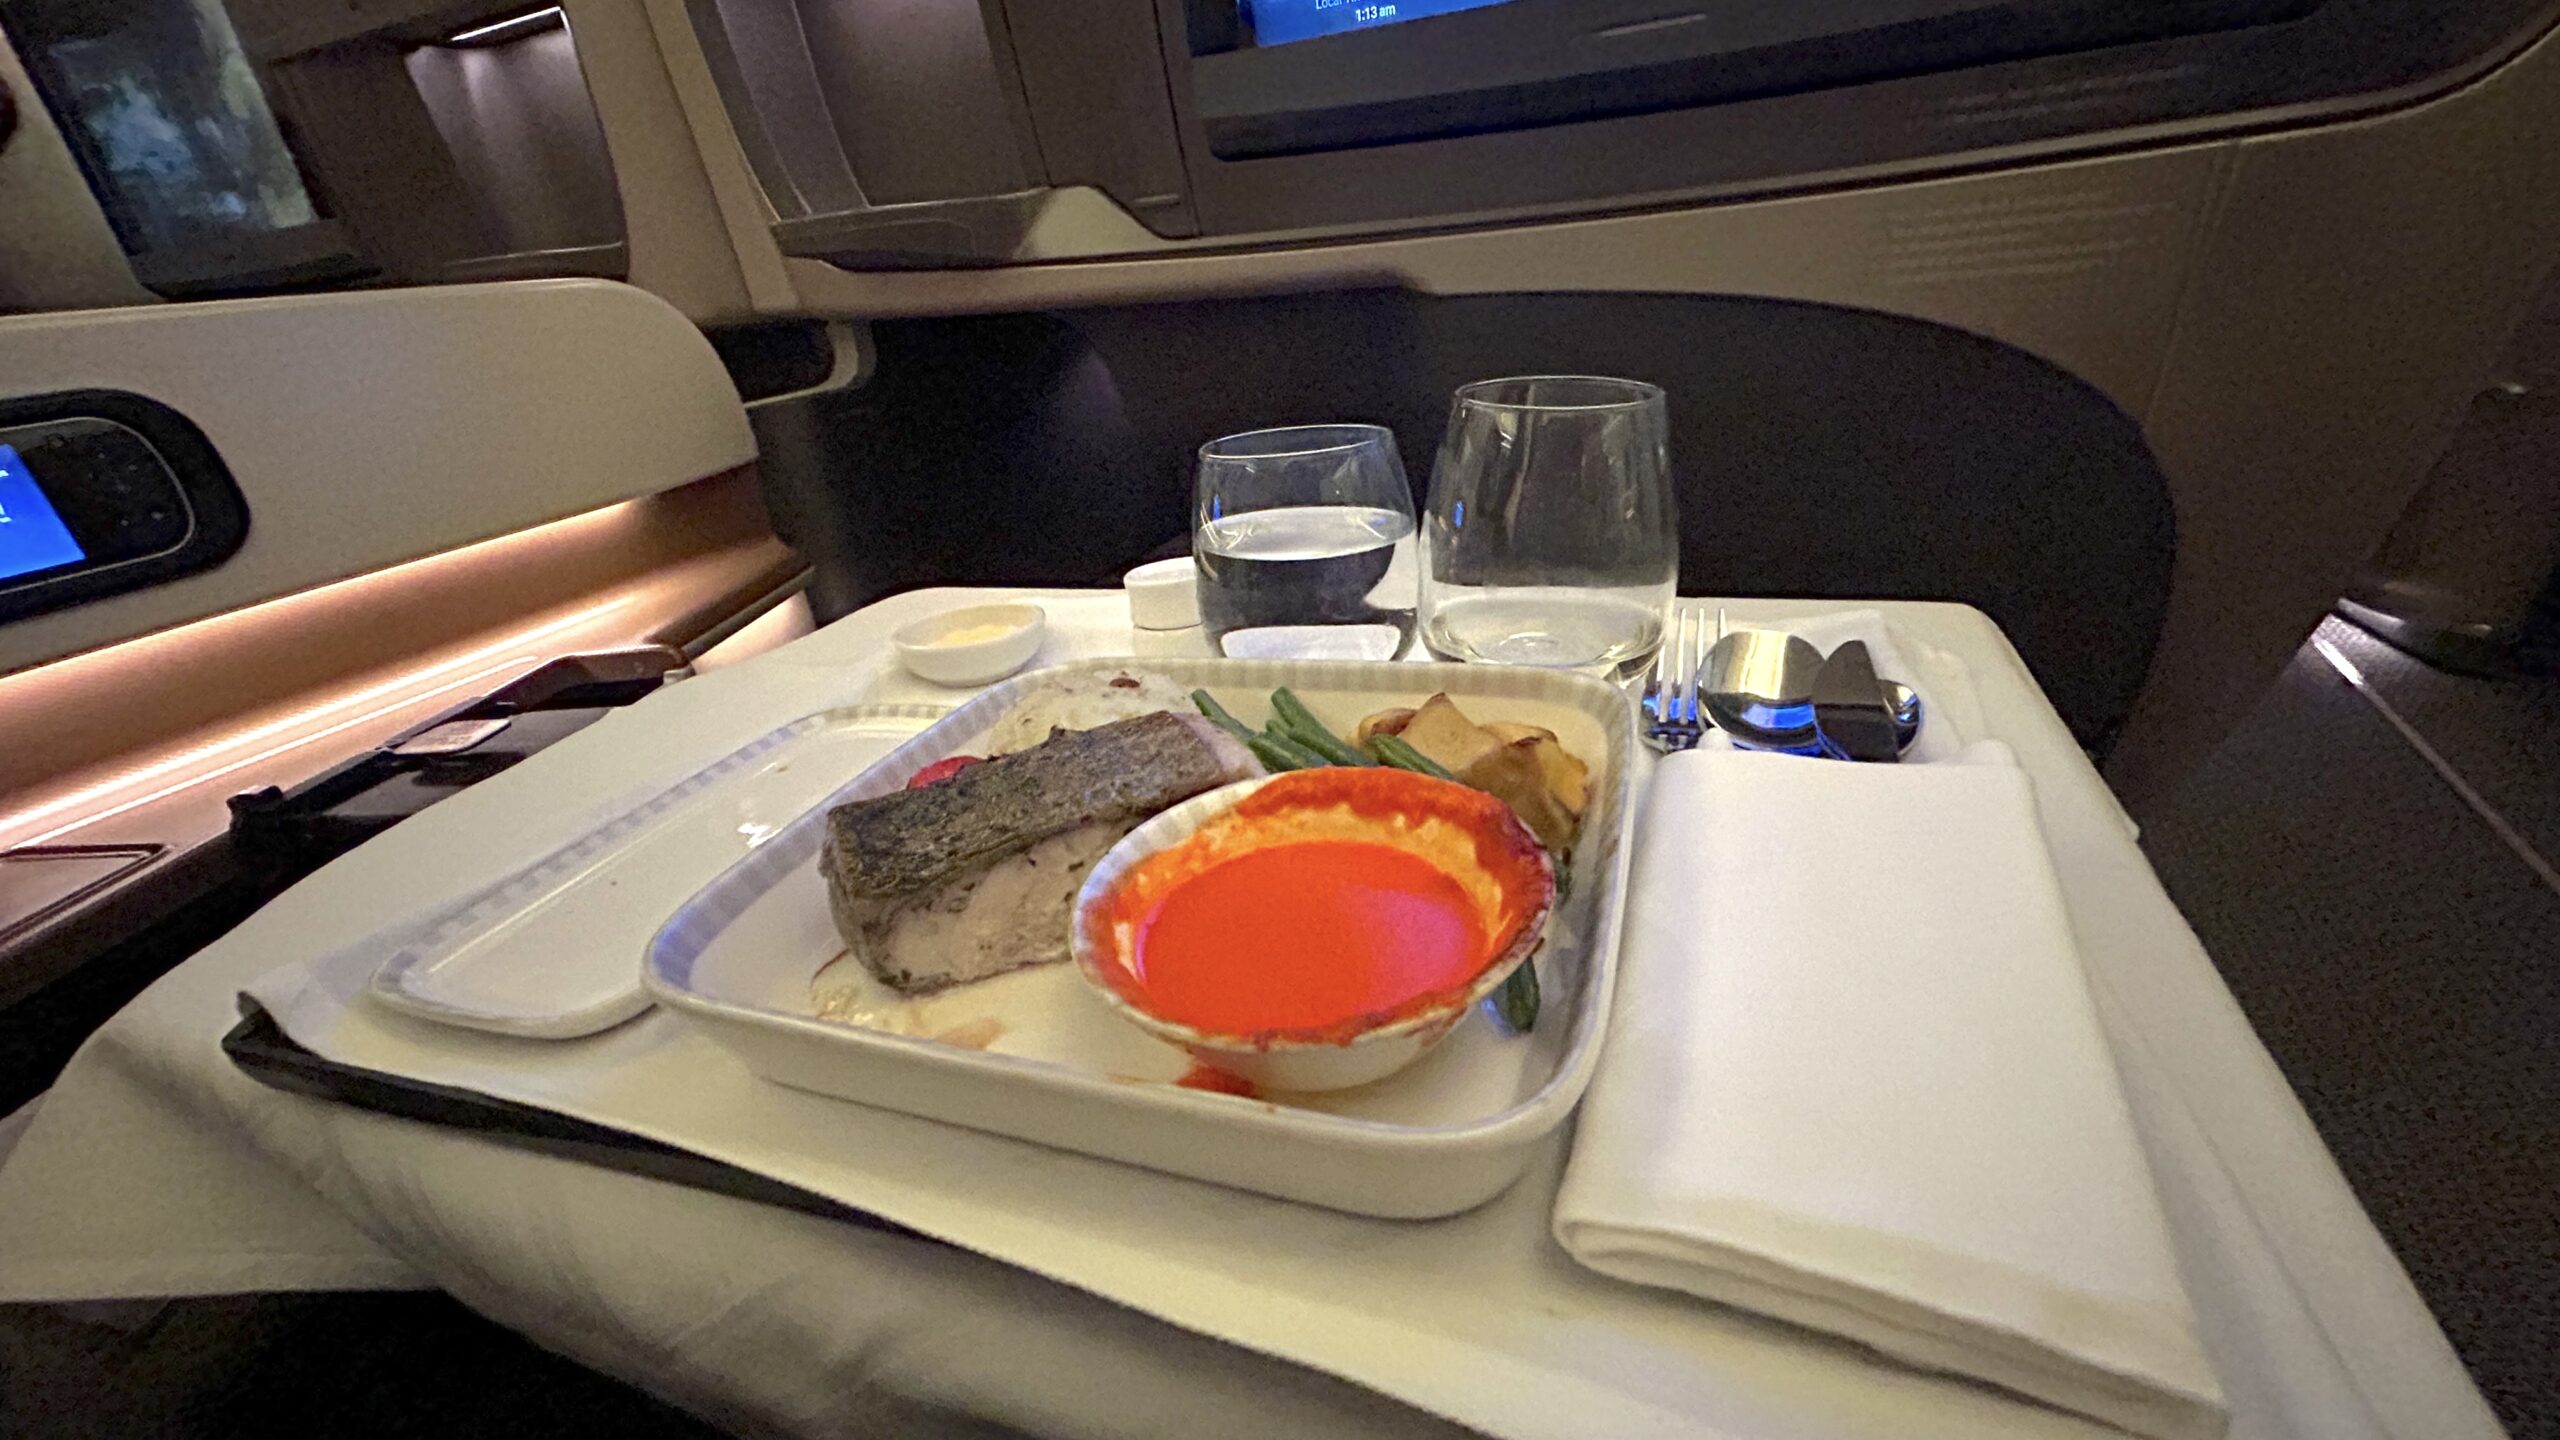 Singapore Airlines A350 Business Class Singapore to Brussels Seared Filet of Barramundi with Red Capsicum Main Meal Point Hacks by Daniel Sciberras